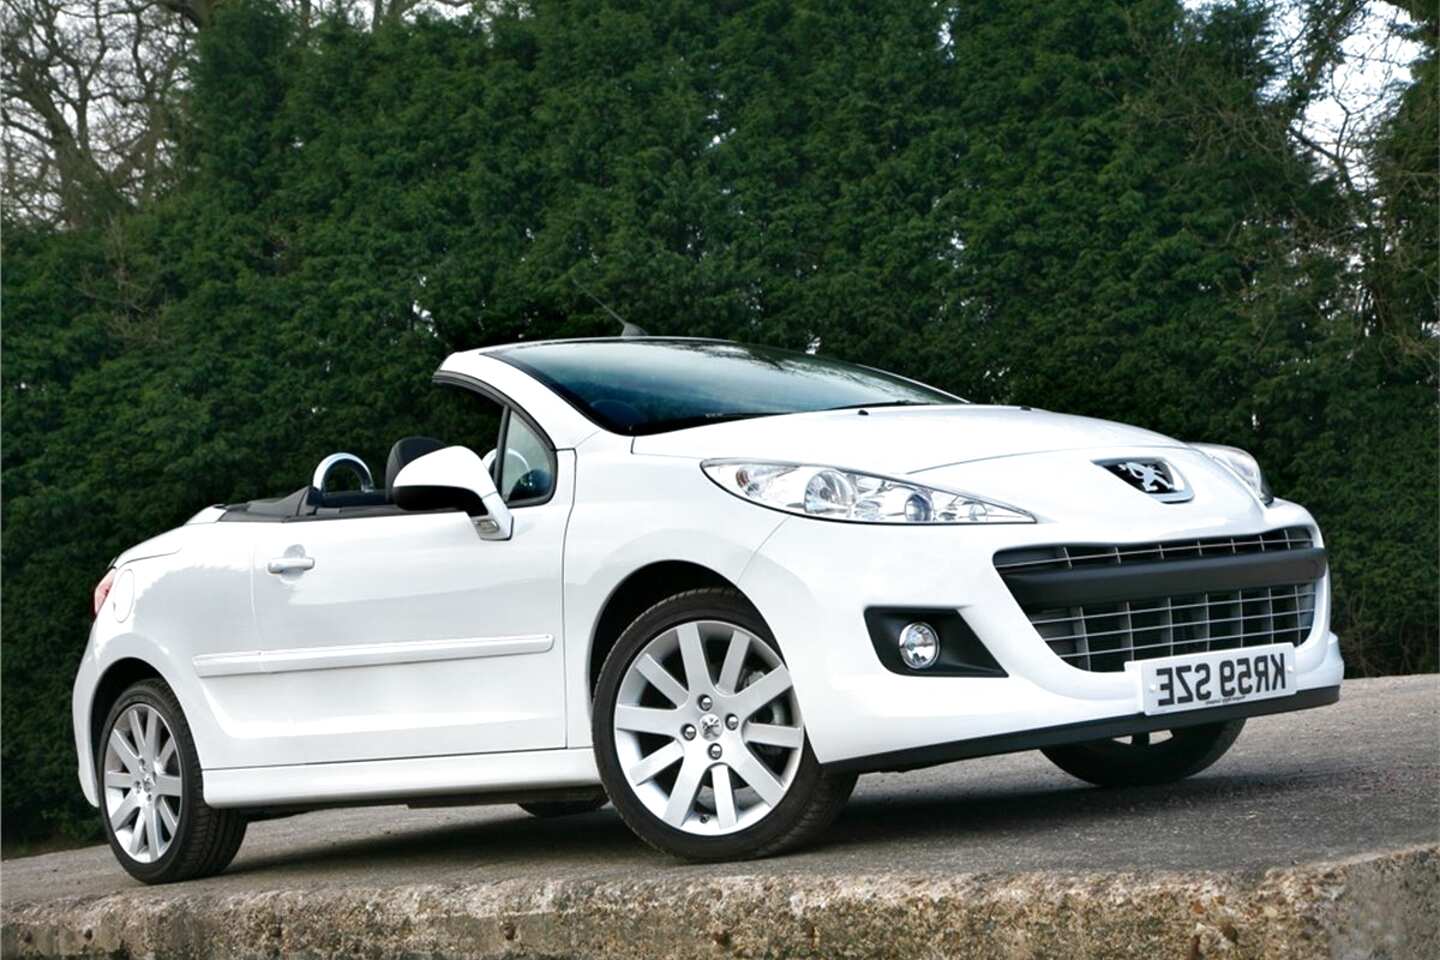 Peugeot 207 Cc for sale in UK 41 used Peugeot 207 Ccs